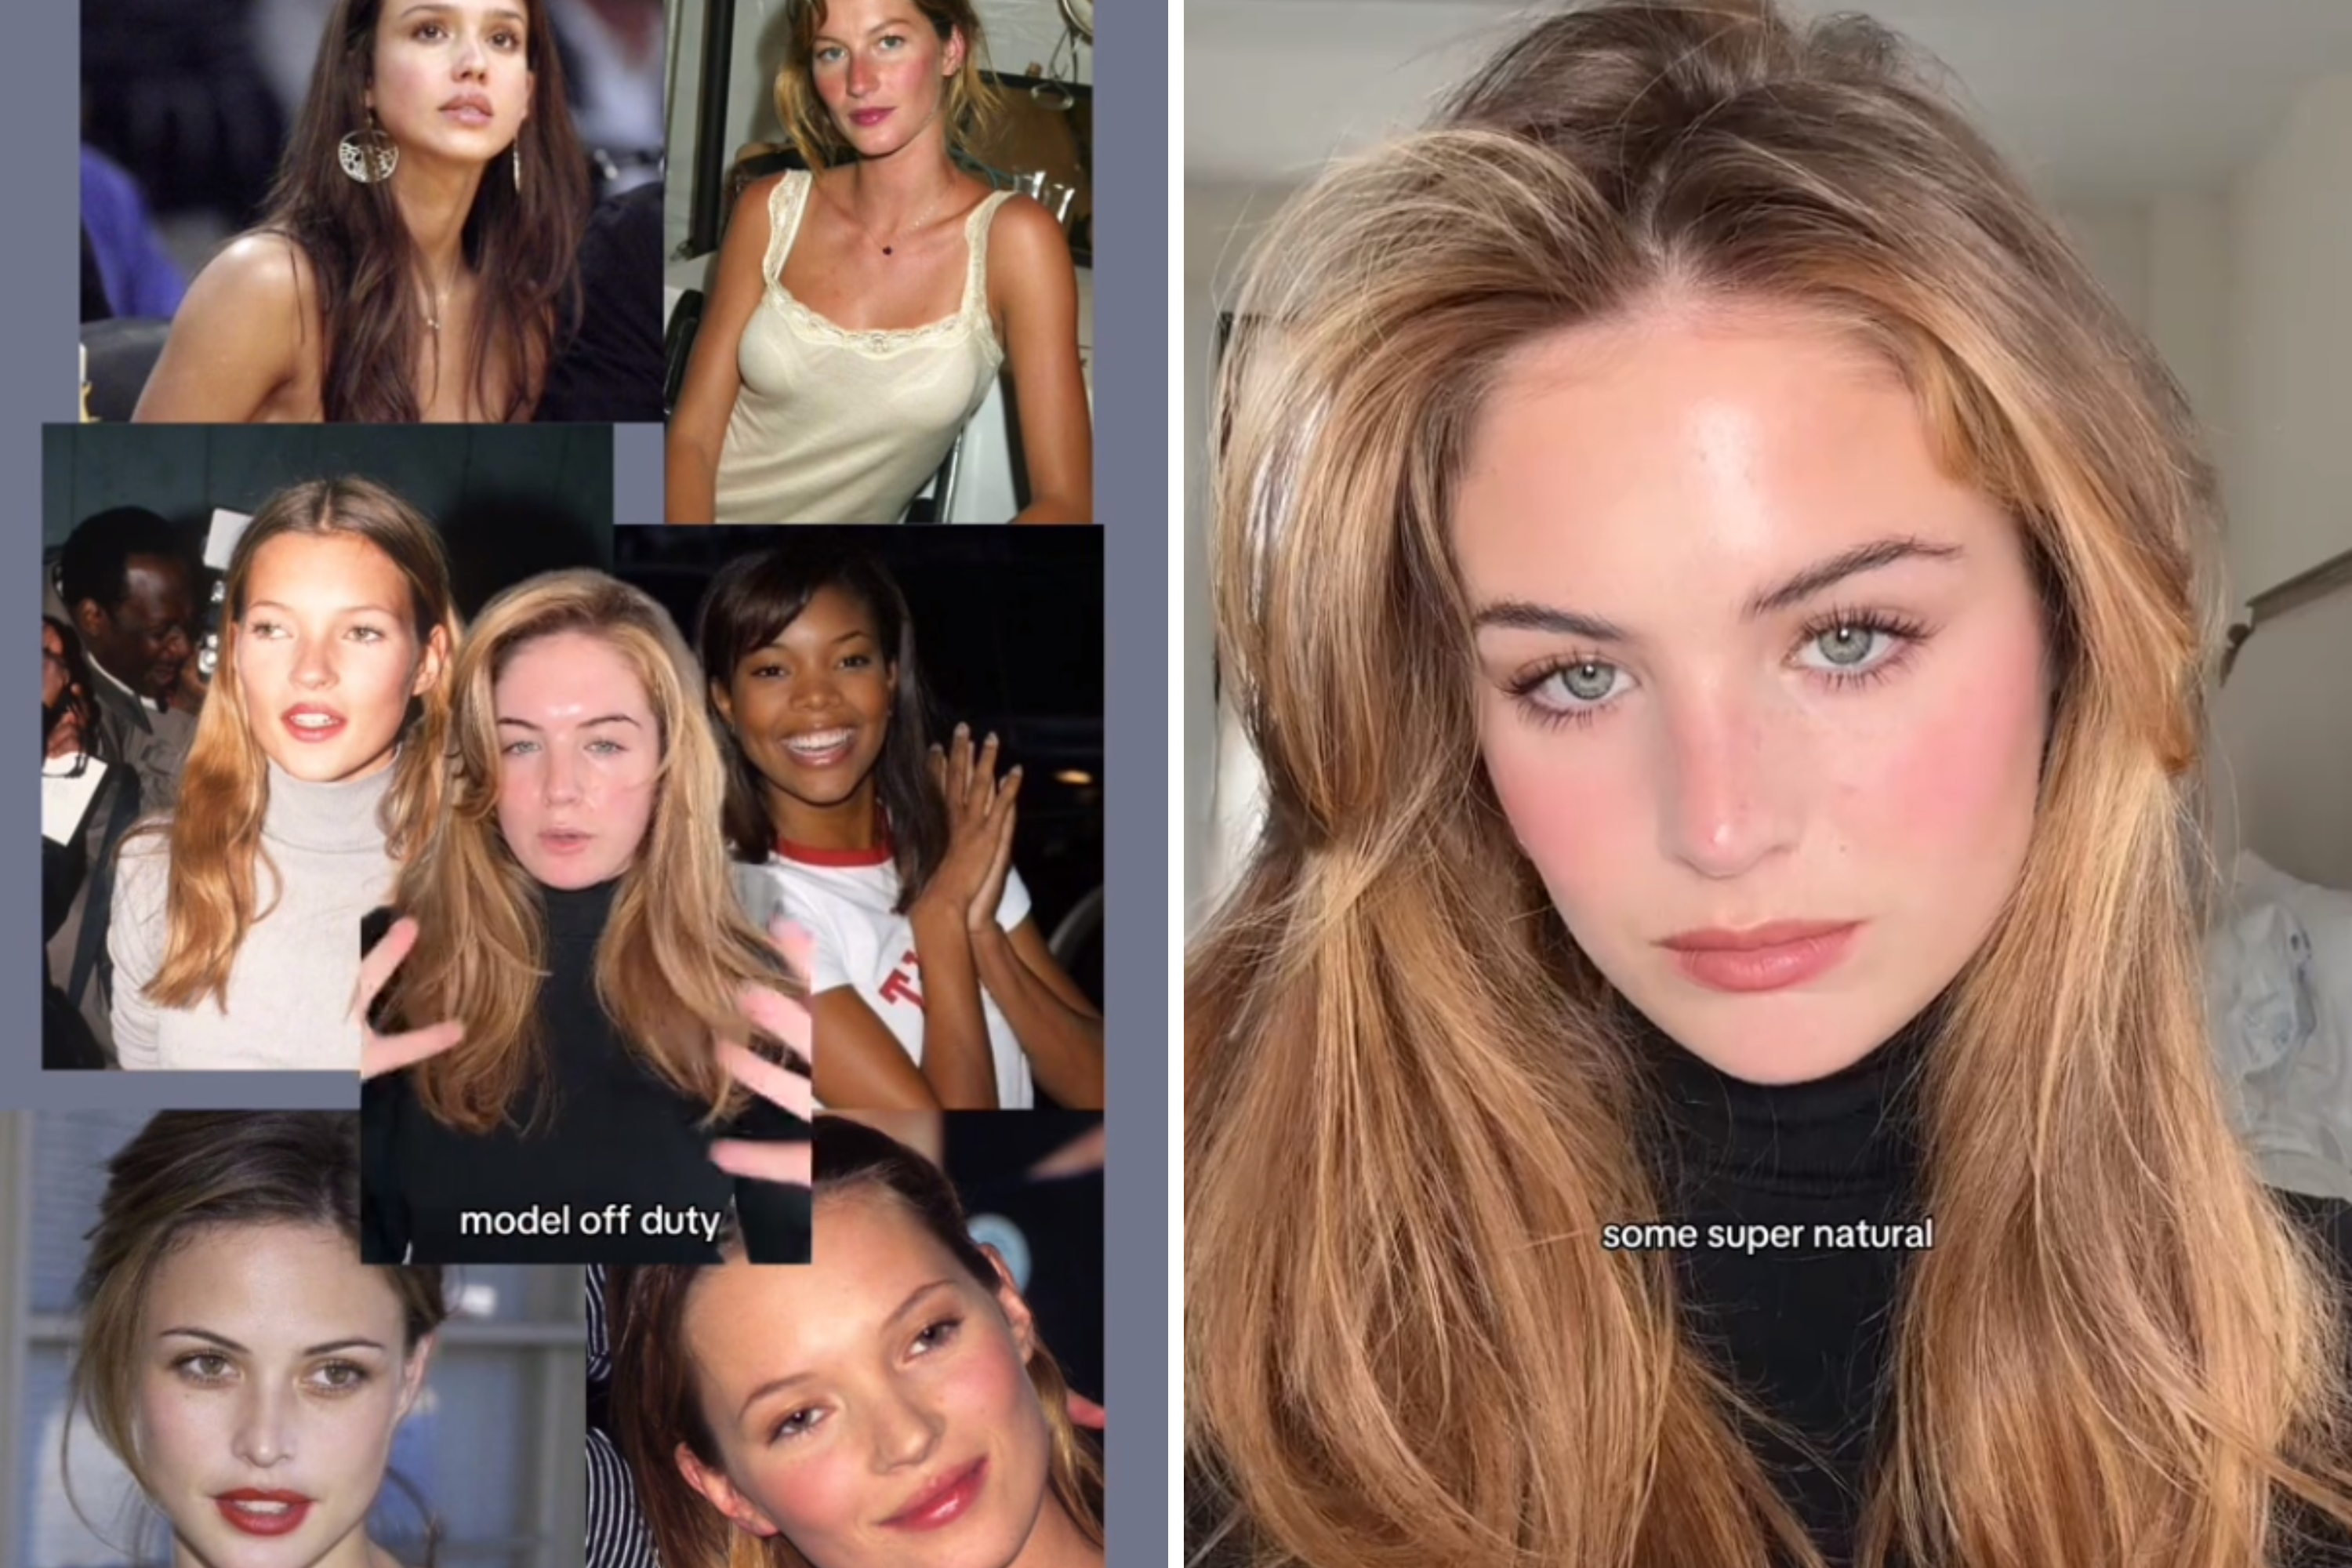 Makeup artist describes how to achieve perfect 90s ‘model off duty’ look